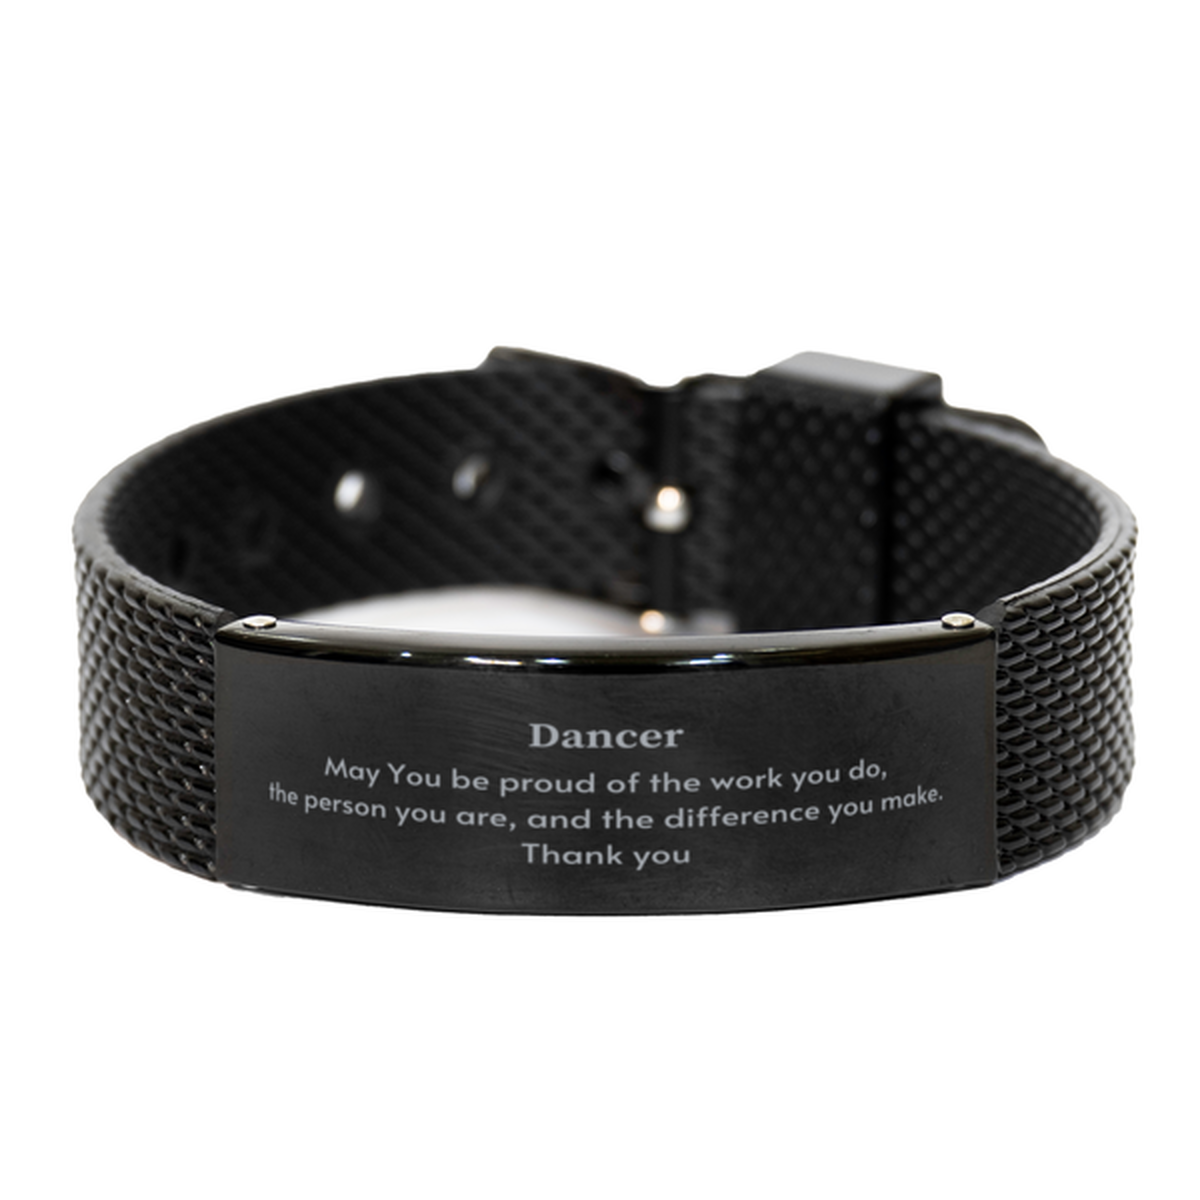 Heartwarming Black Shark Mesh Bracelet Retirement Coworkers Gifts for Dancer, Dancer May You be proud of the work you do, the person you are Gifts for Boss Men Women Friends